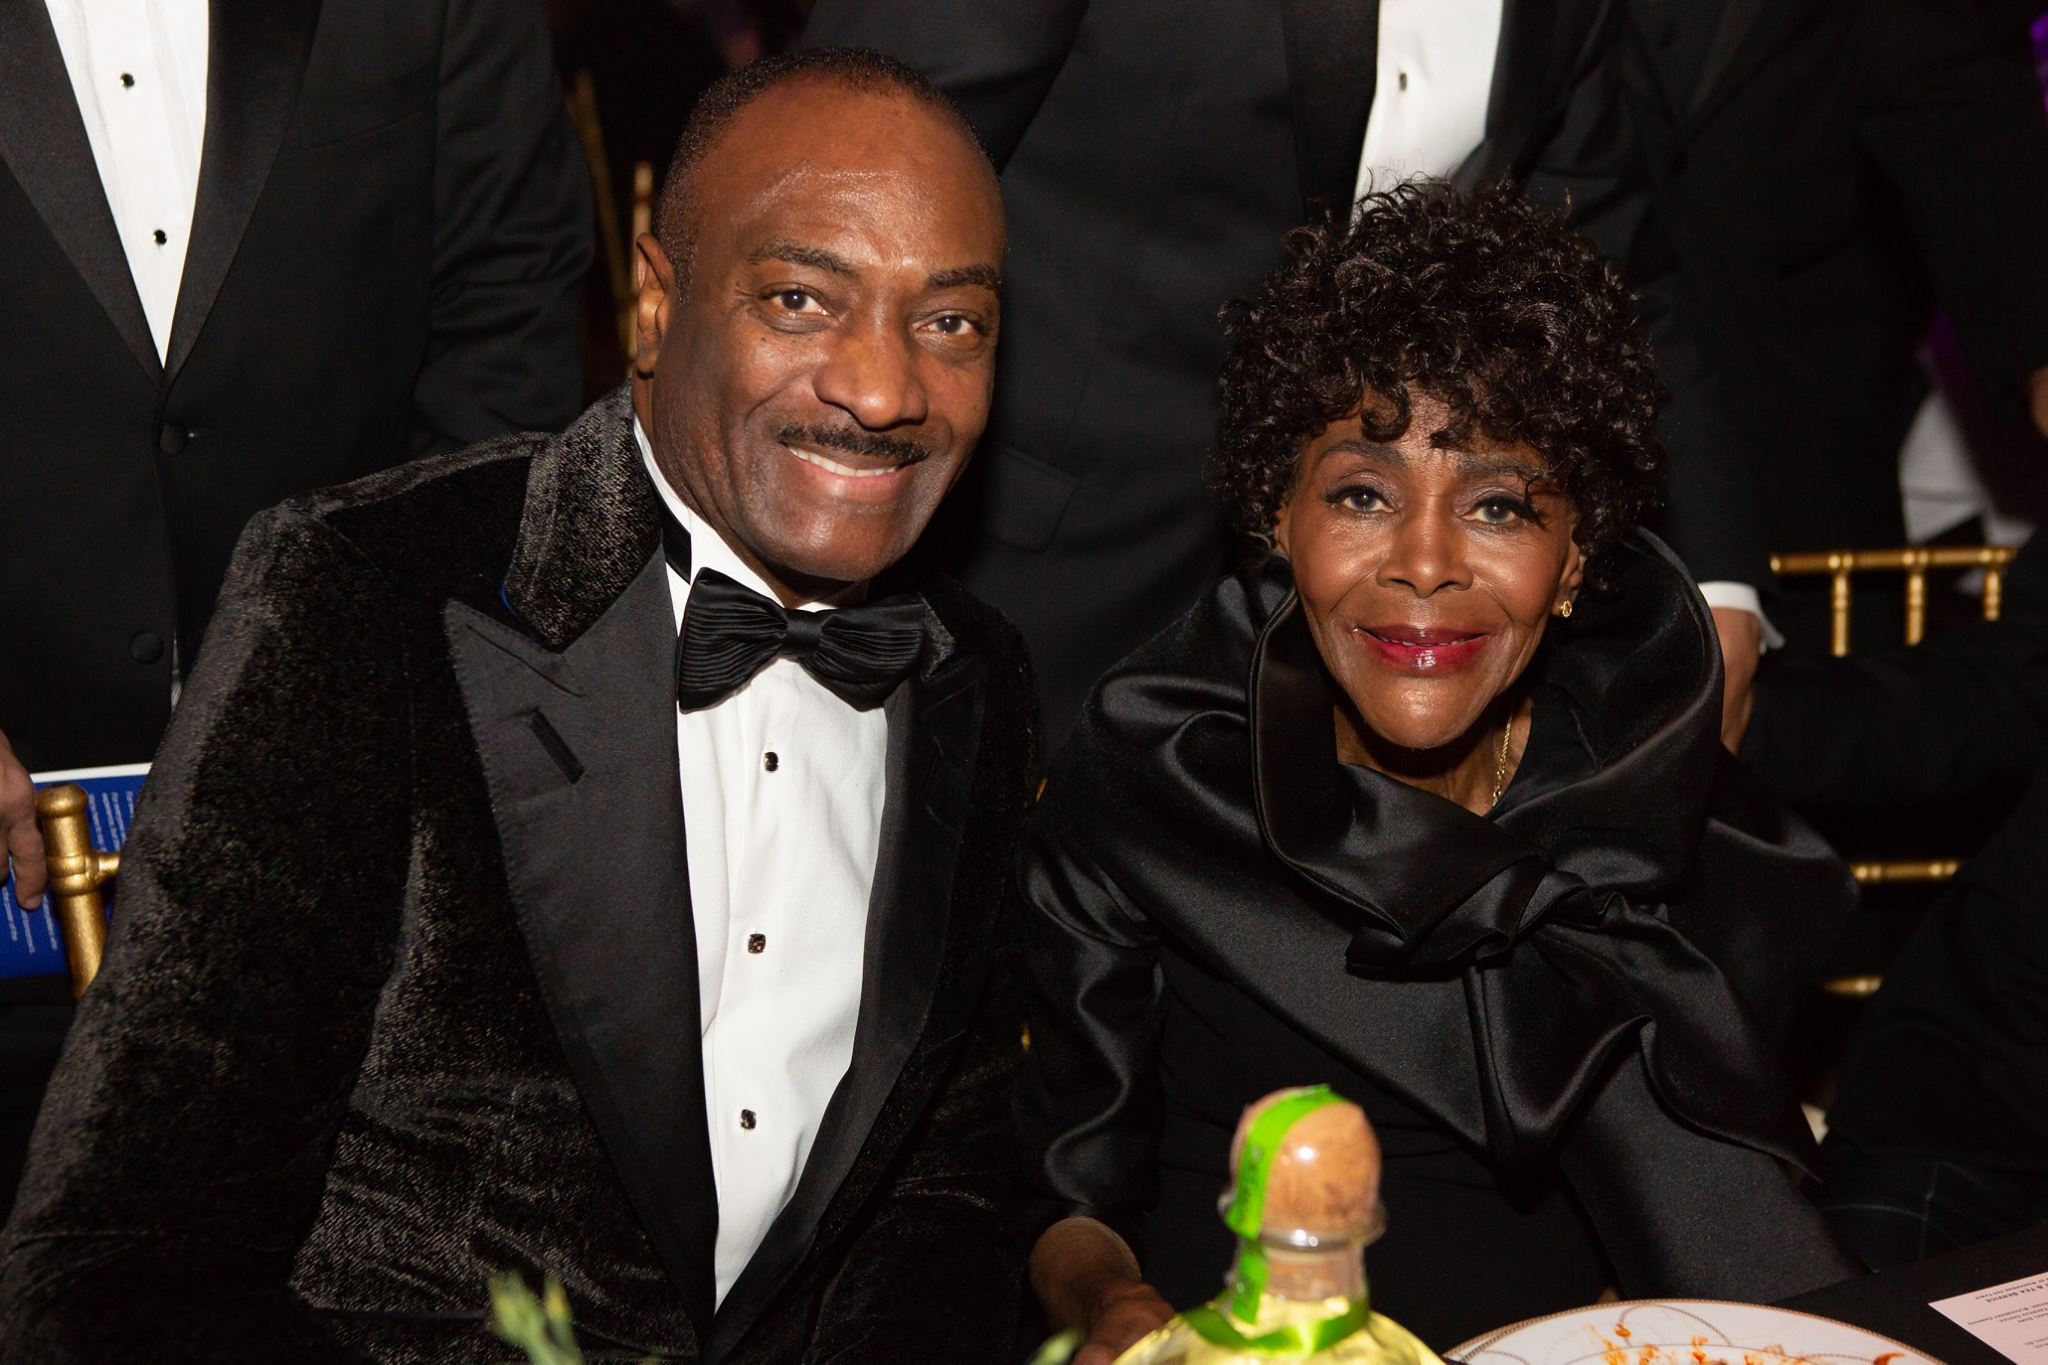 Reggie Van Lee and Cicley Tyson at TDF's 2019 Gala